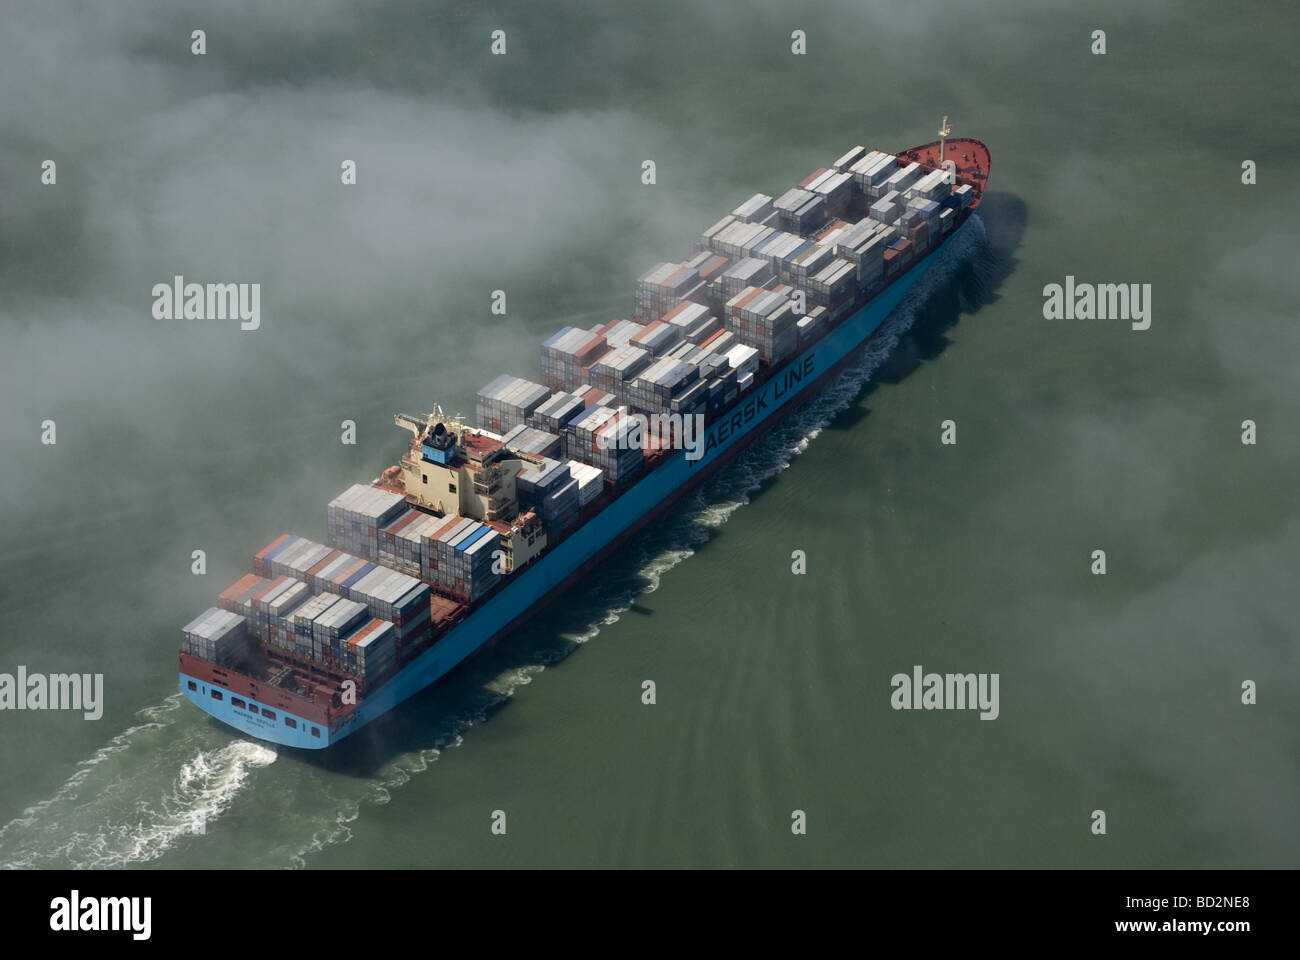 The Maersk Seville emerging from the sea fog Stock Photo